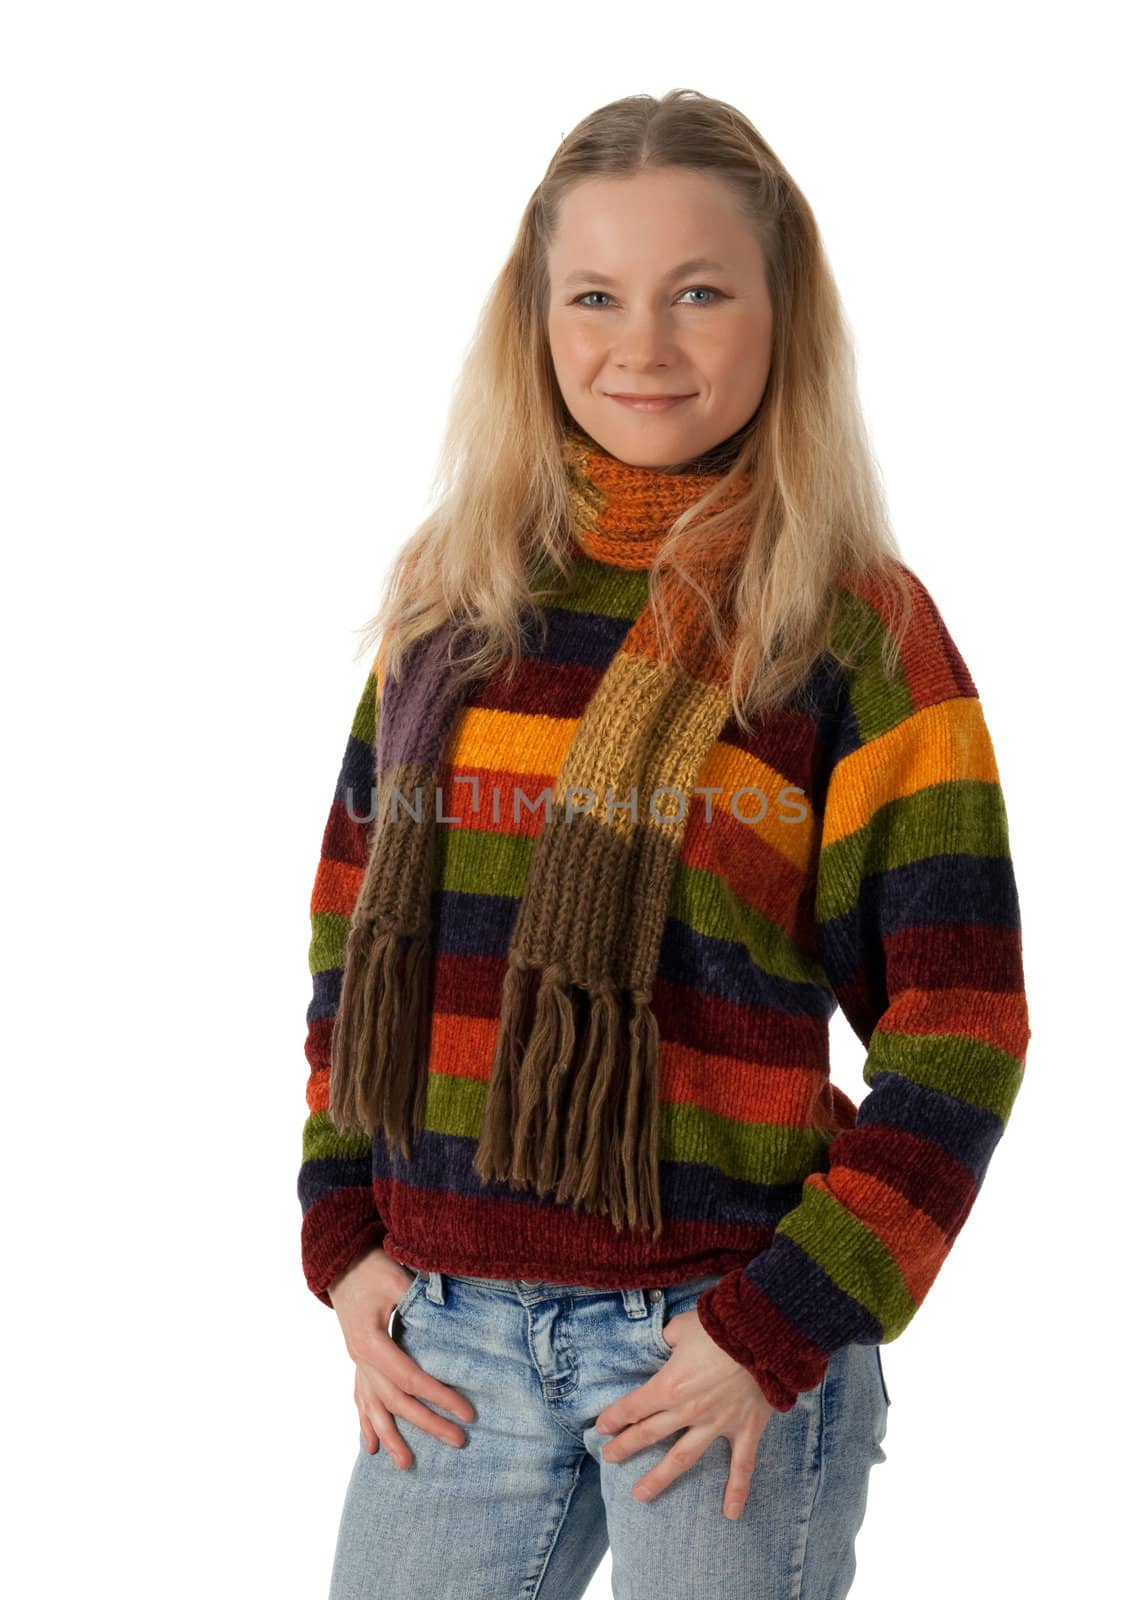 Smiling young woman wearing striped sweater and scarf, holding hands in pockets.